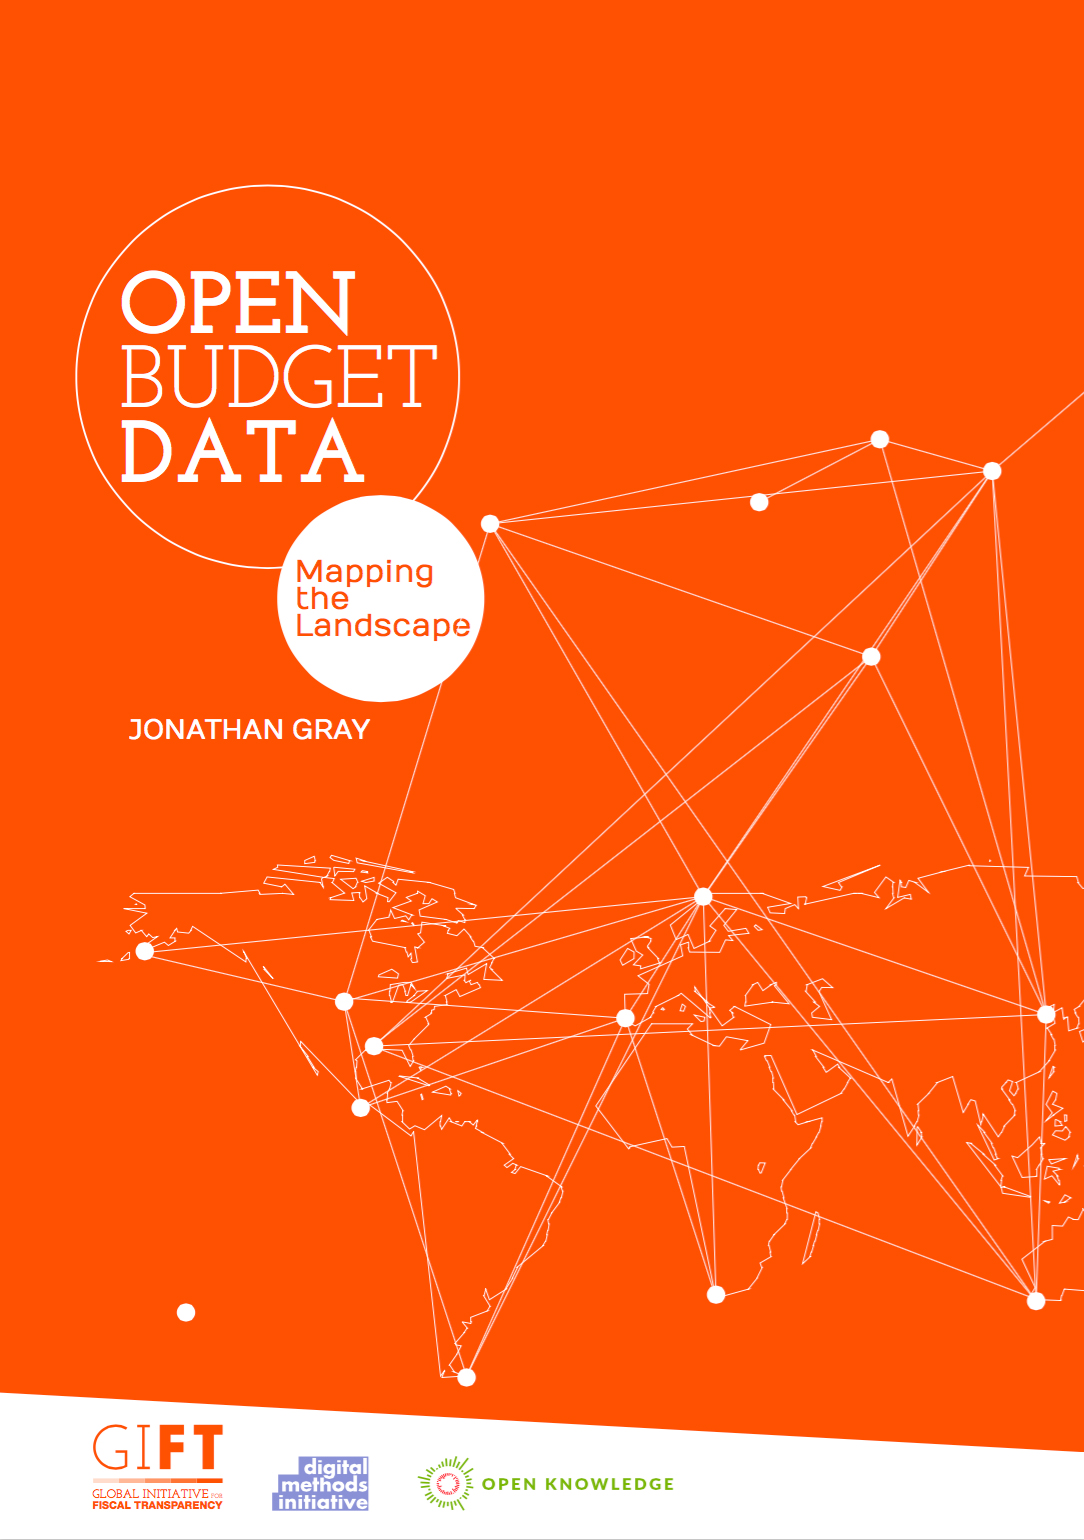 OPEN BUDGET DATA - Mapping the Landscape